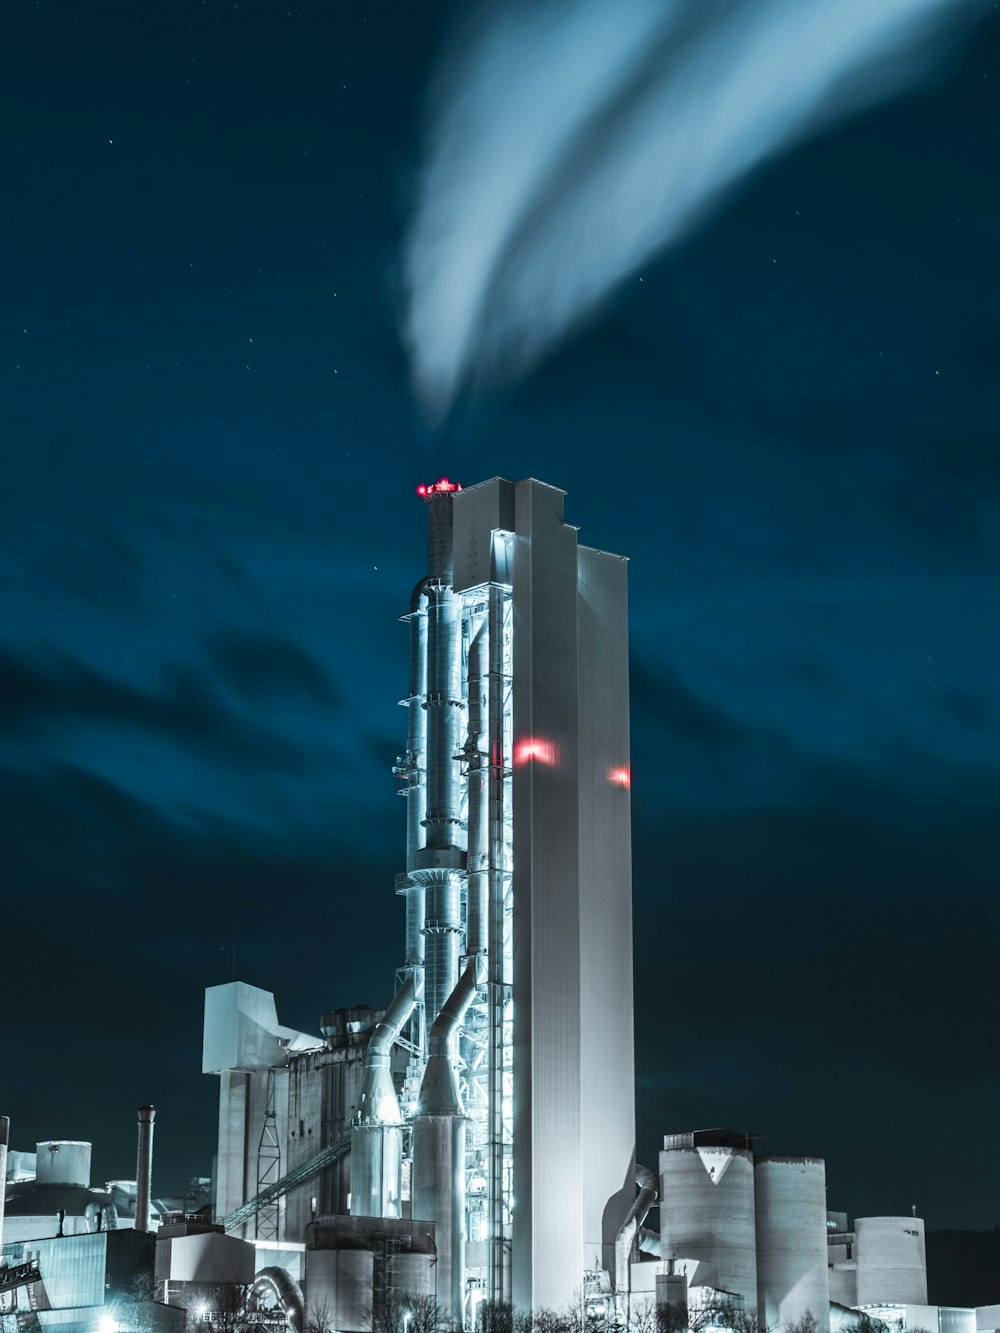 white and black concrete building under blue sky during nighttime